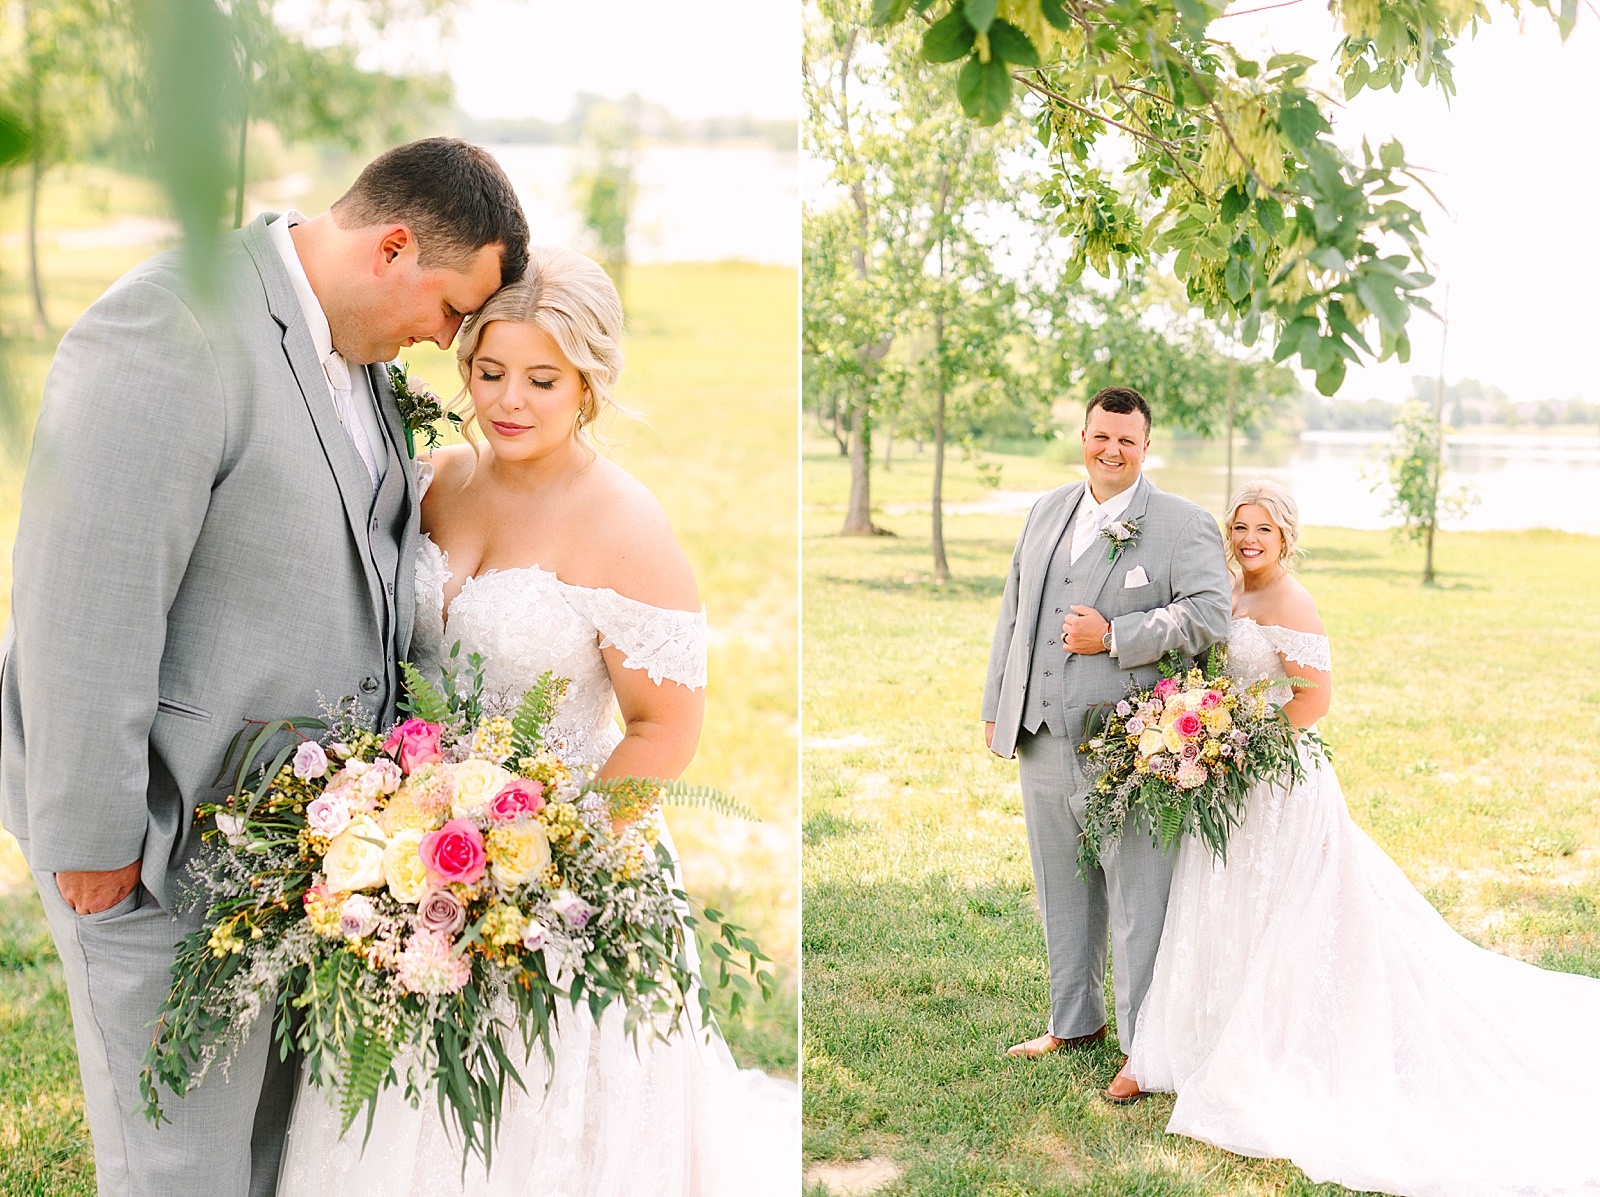 A Sunny Summer Wedding at Friedman Park in Newburgh Indiana | Paige and Dylan | Bret and Brandie Photography079.jpg